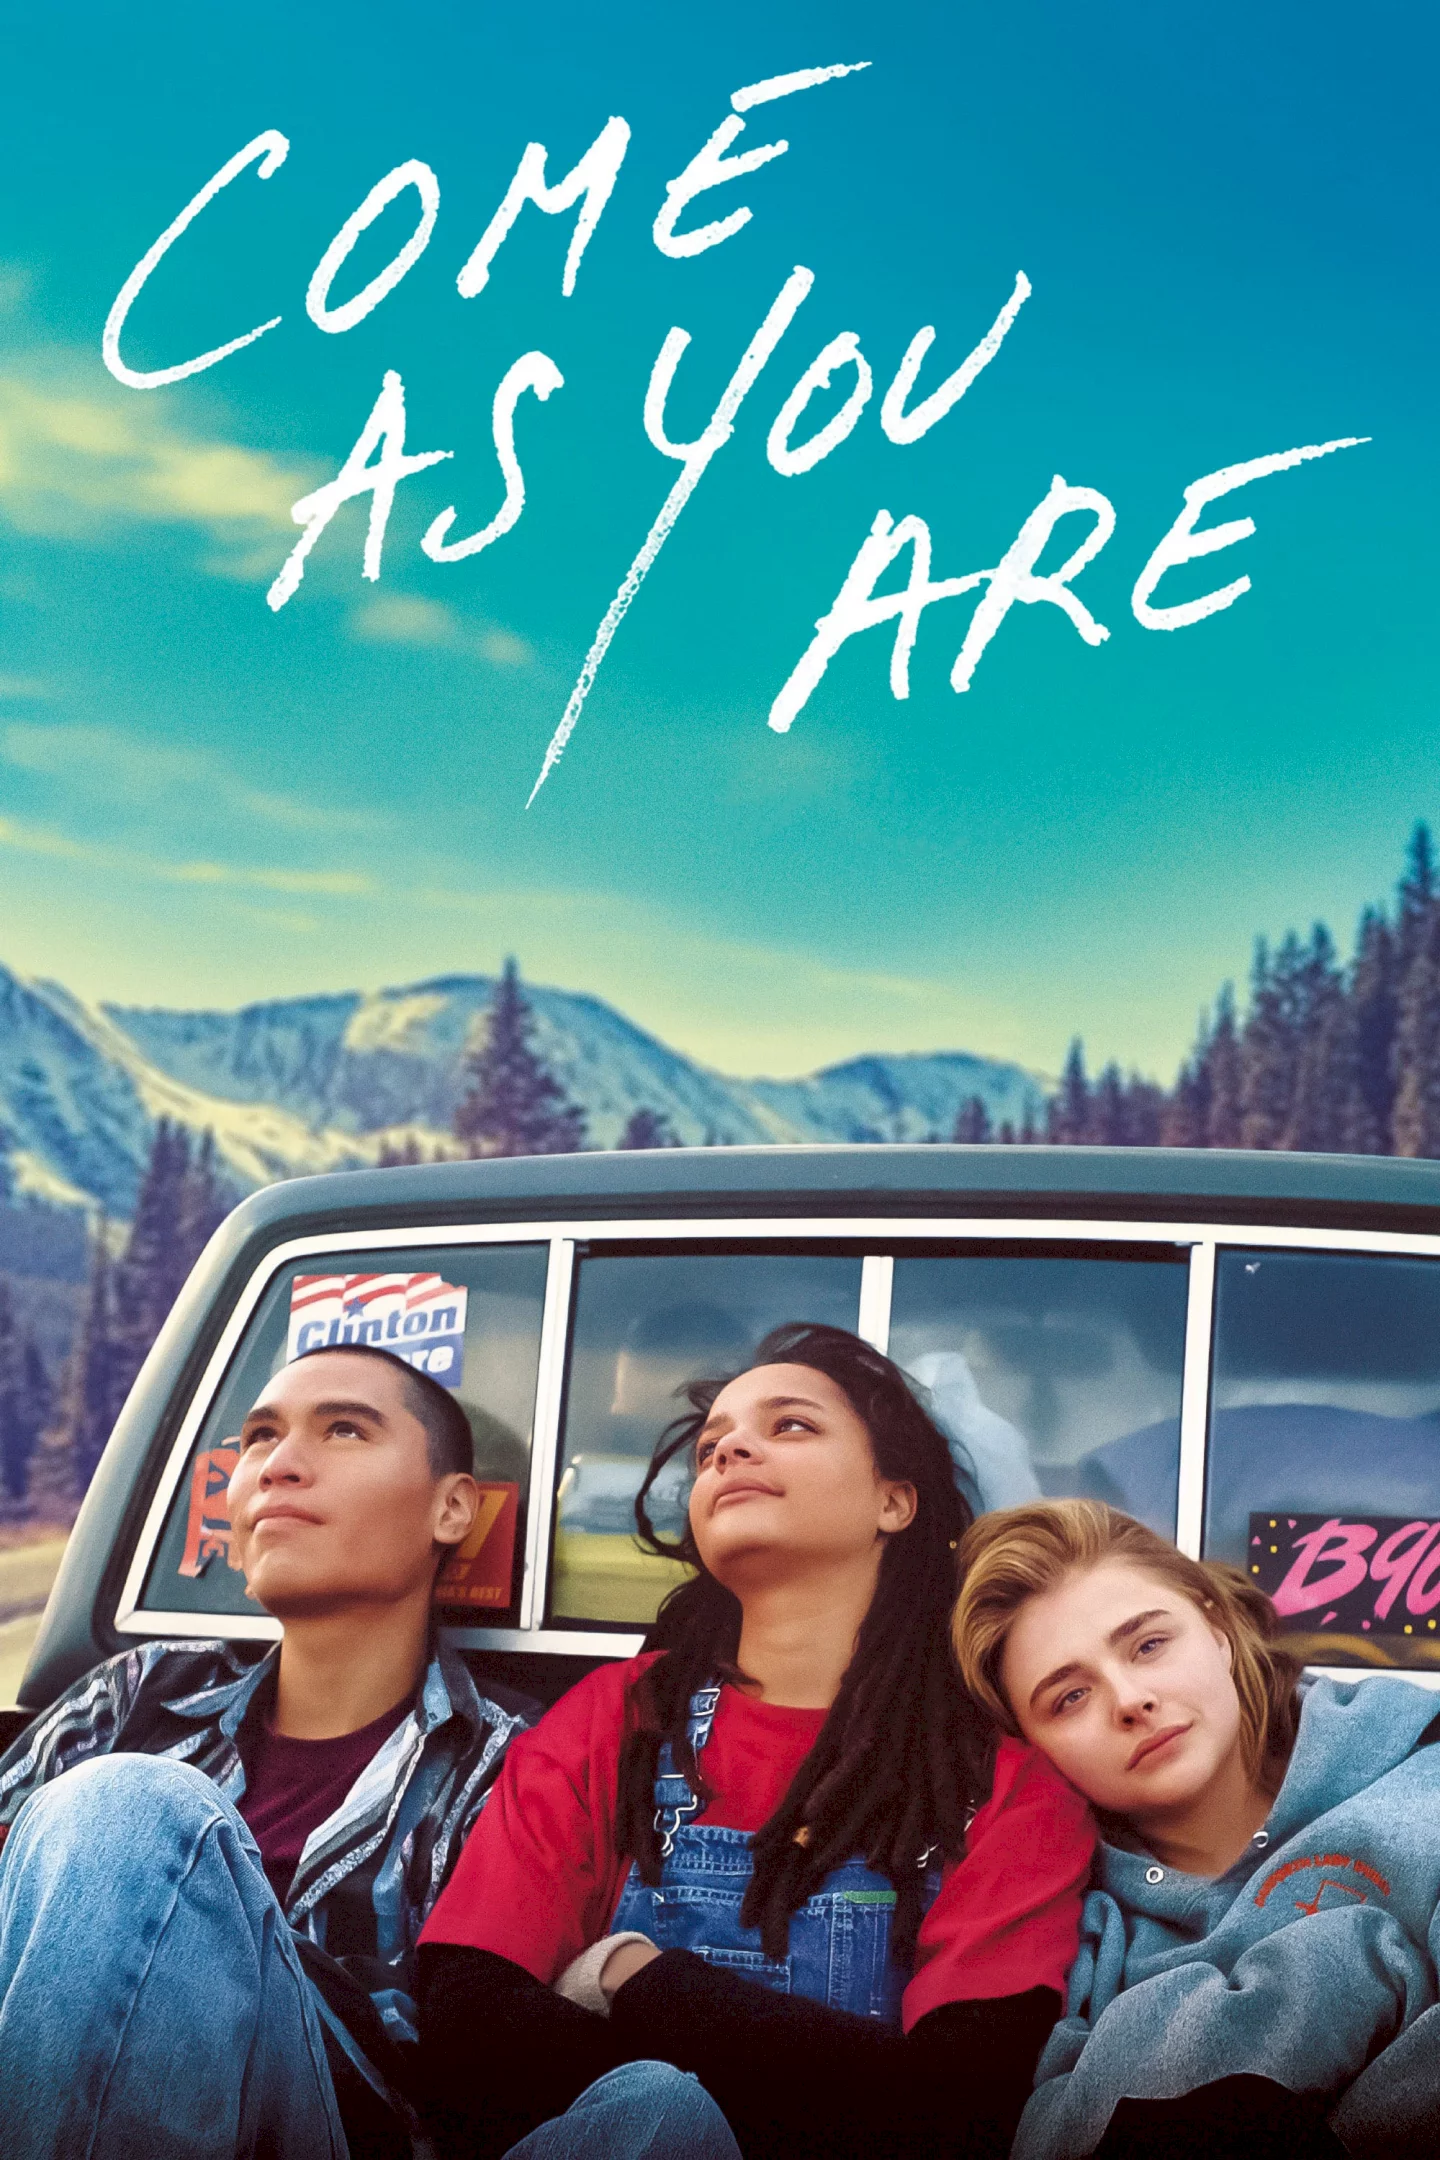 Photo du film : Come as You Are